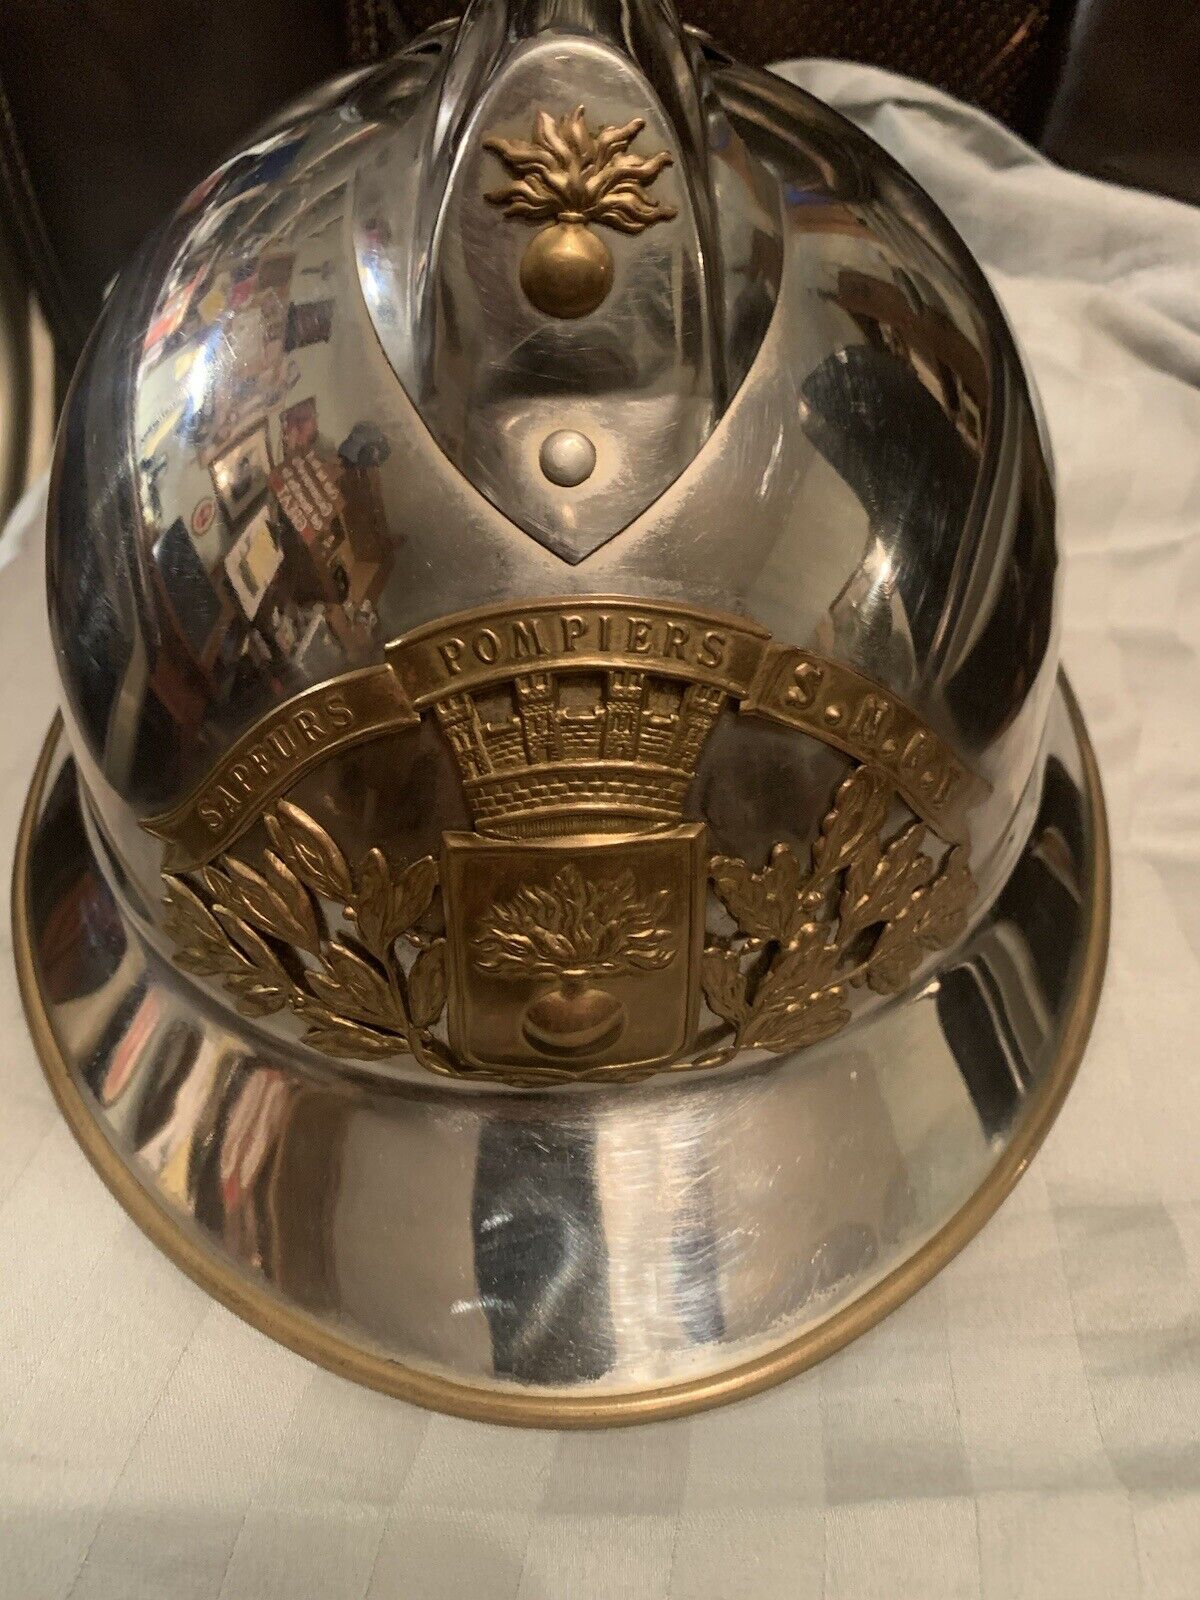 OLD FRENCH NICKELED FIREMAN HELMET OFFICER SAPEURS POMPIERS  ADRIAN / LILLE Nice